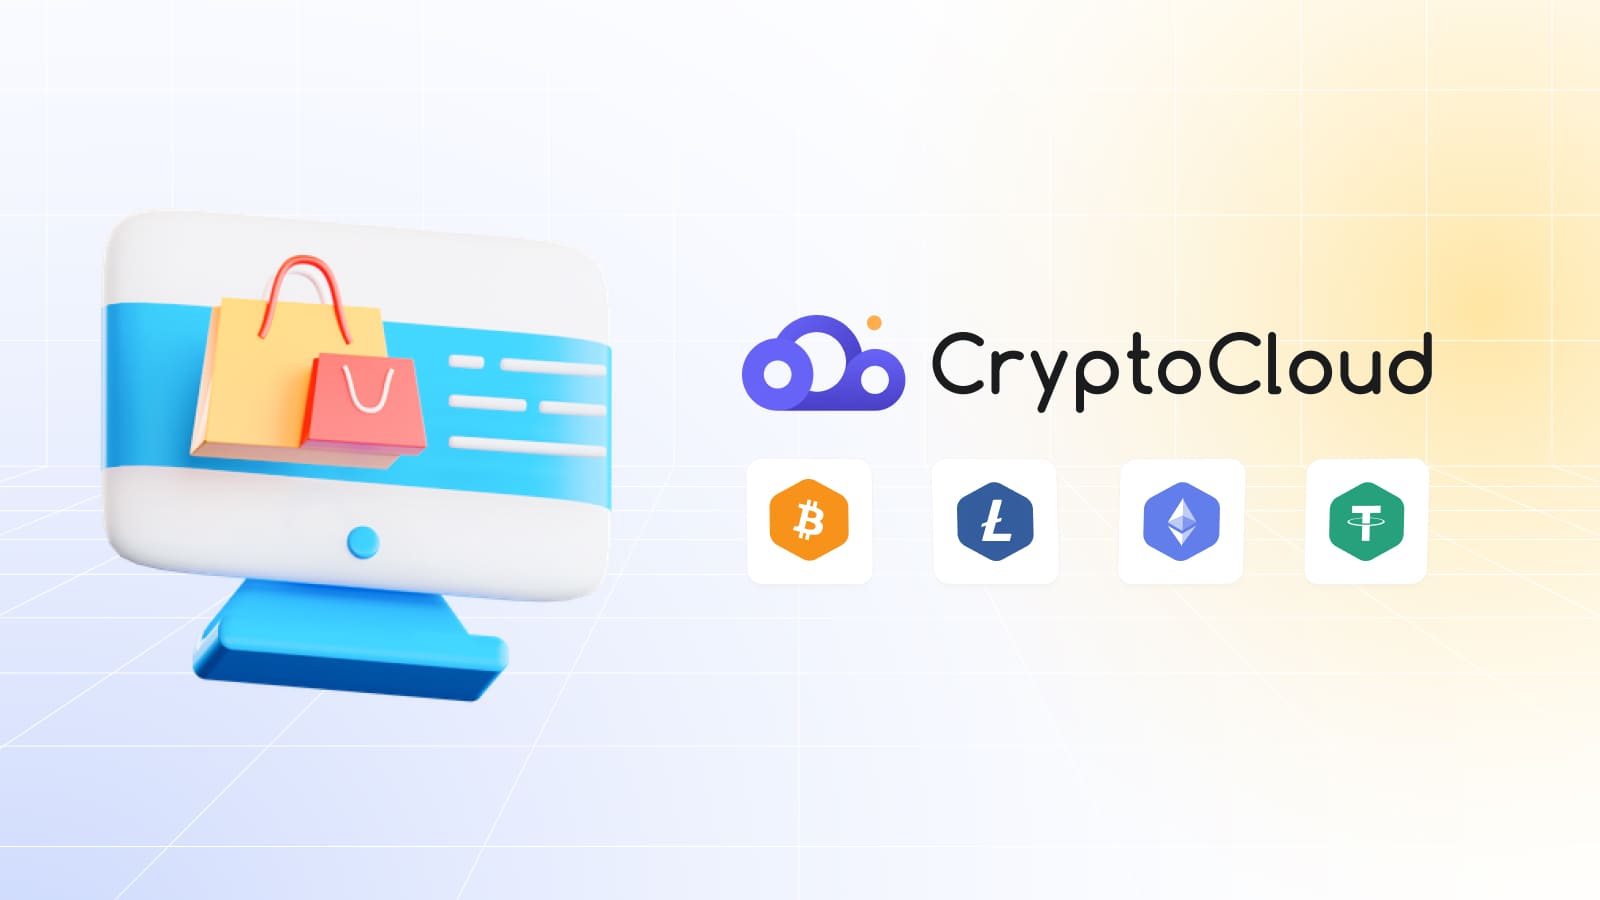 Here is how to connect to CryptoCloud crypto processing on your website.